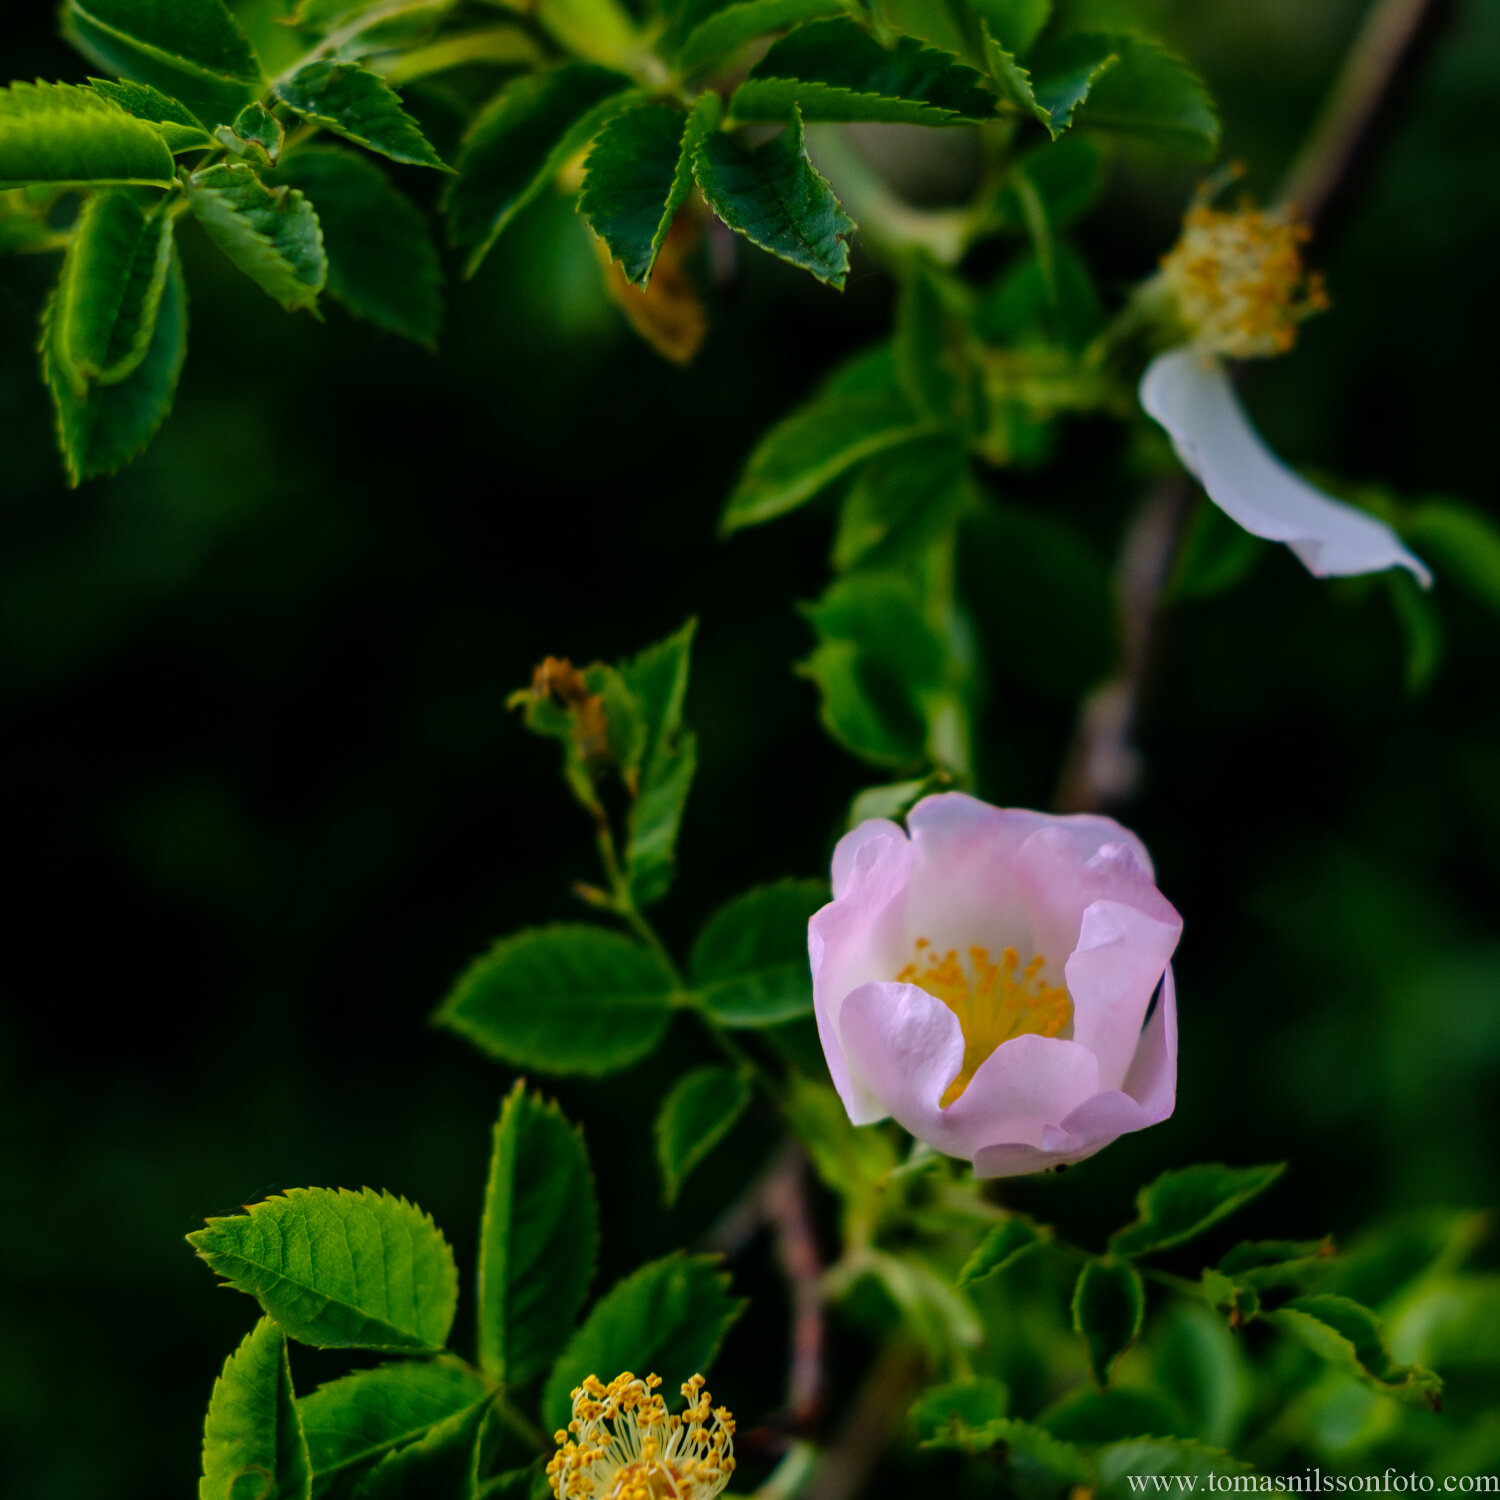 Day 186 - July 5: Delicate